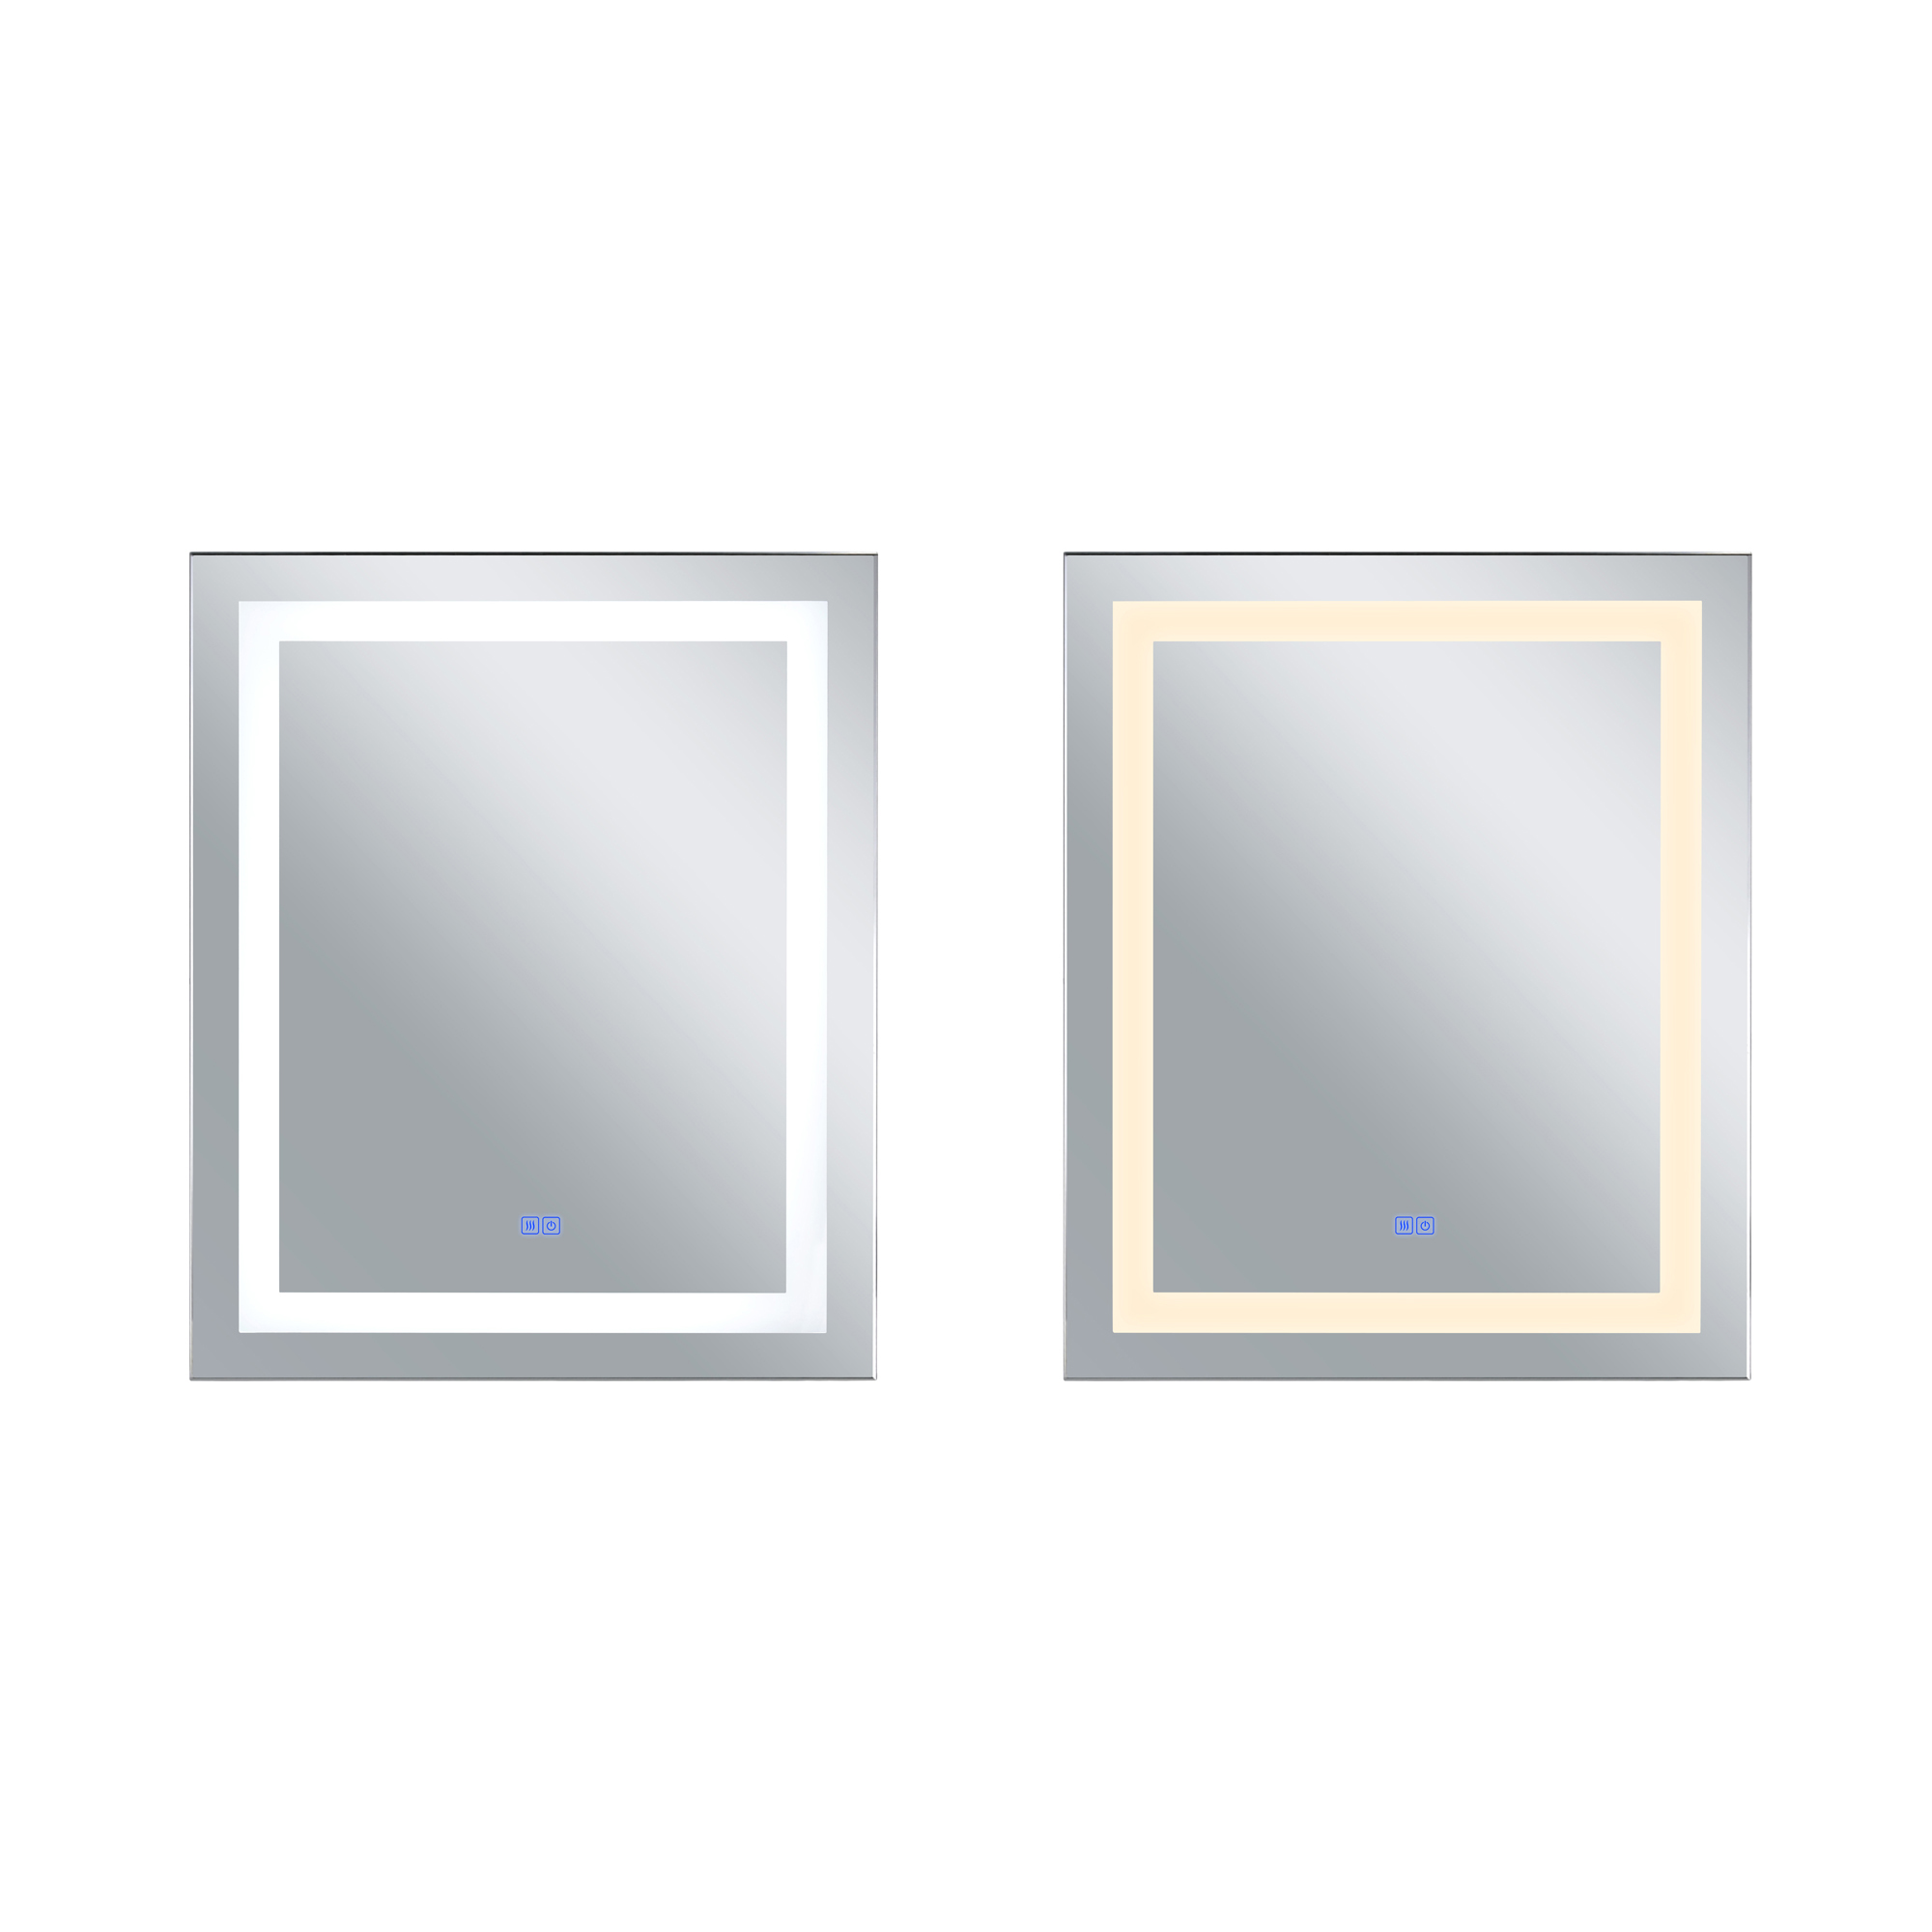 Abril Rectangle Matte White LED 30 in. Mirror From our Abril Collection